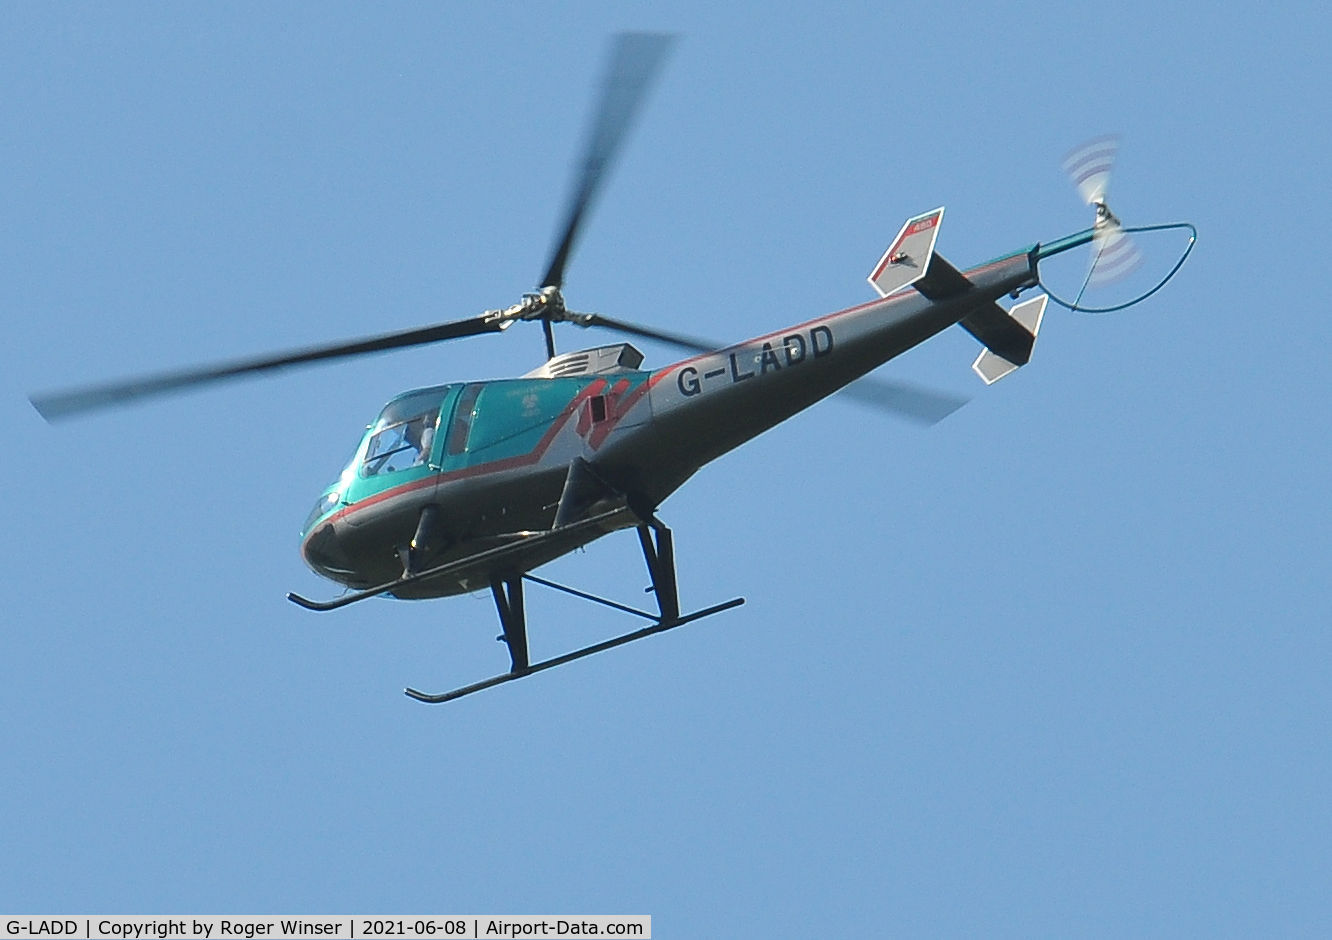 G-LADD, 1999 Enstrom 480 C/N 5037, Off airport. Seen flying over Swansea, Wales, UK returning to base.